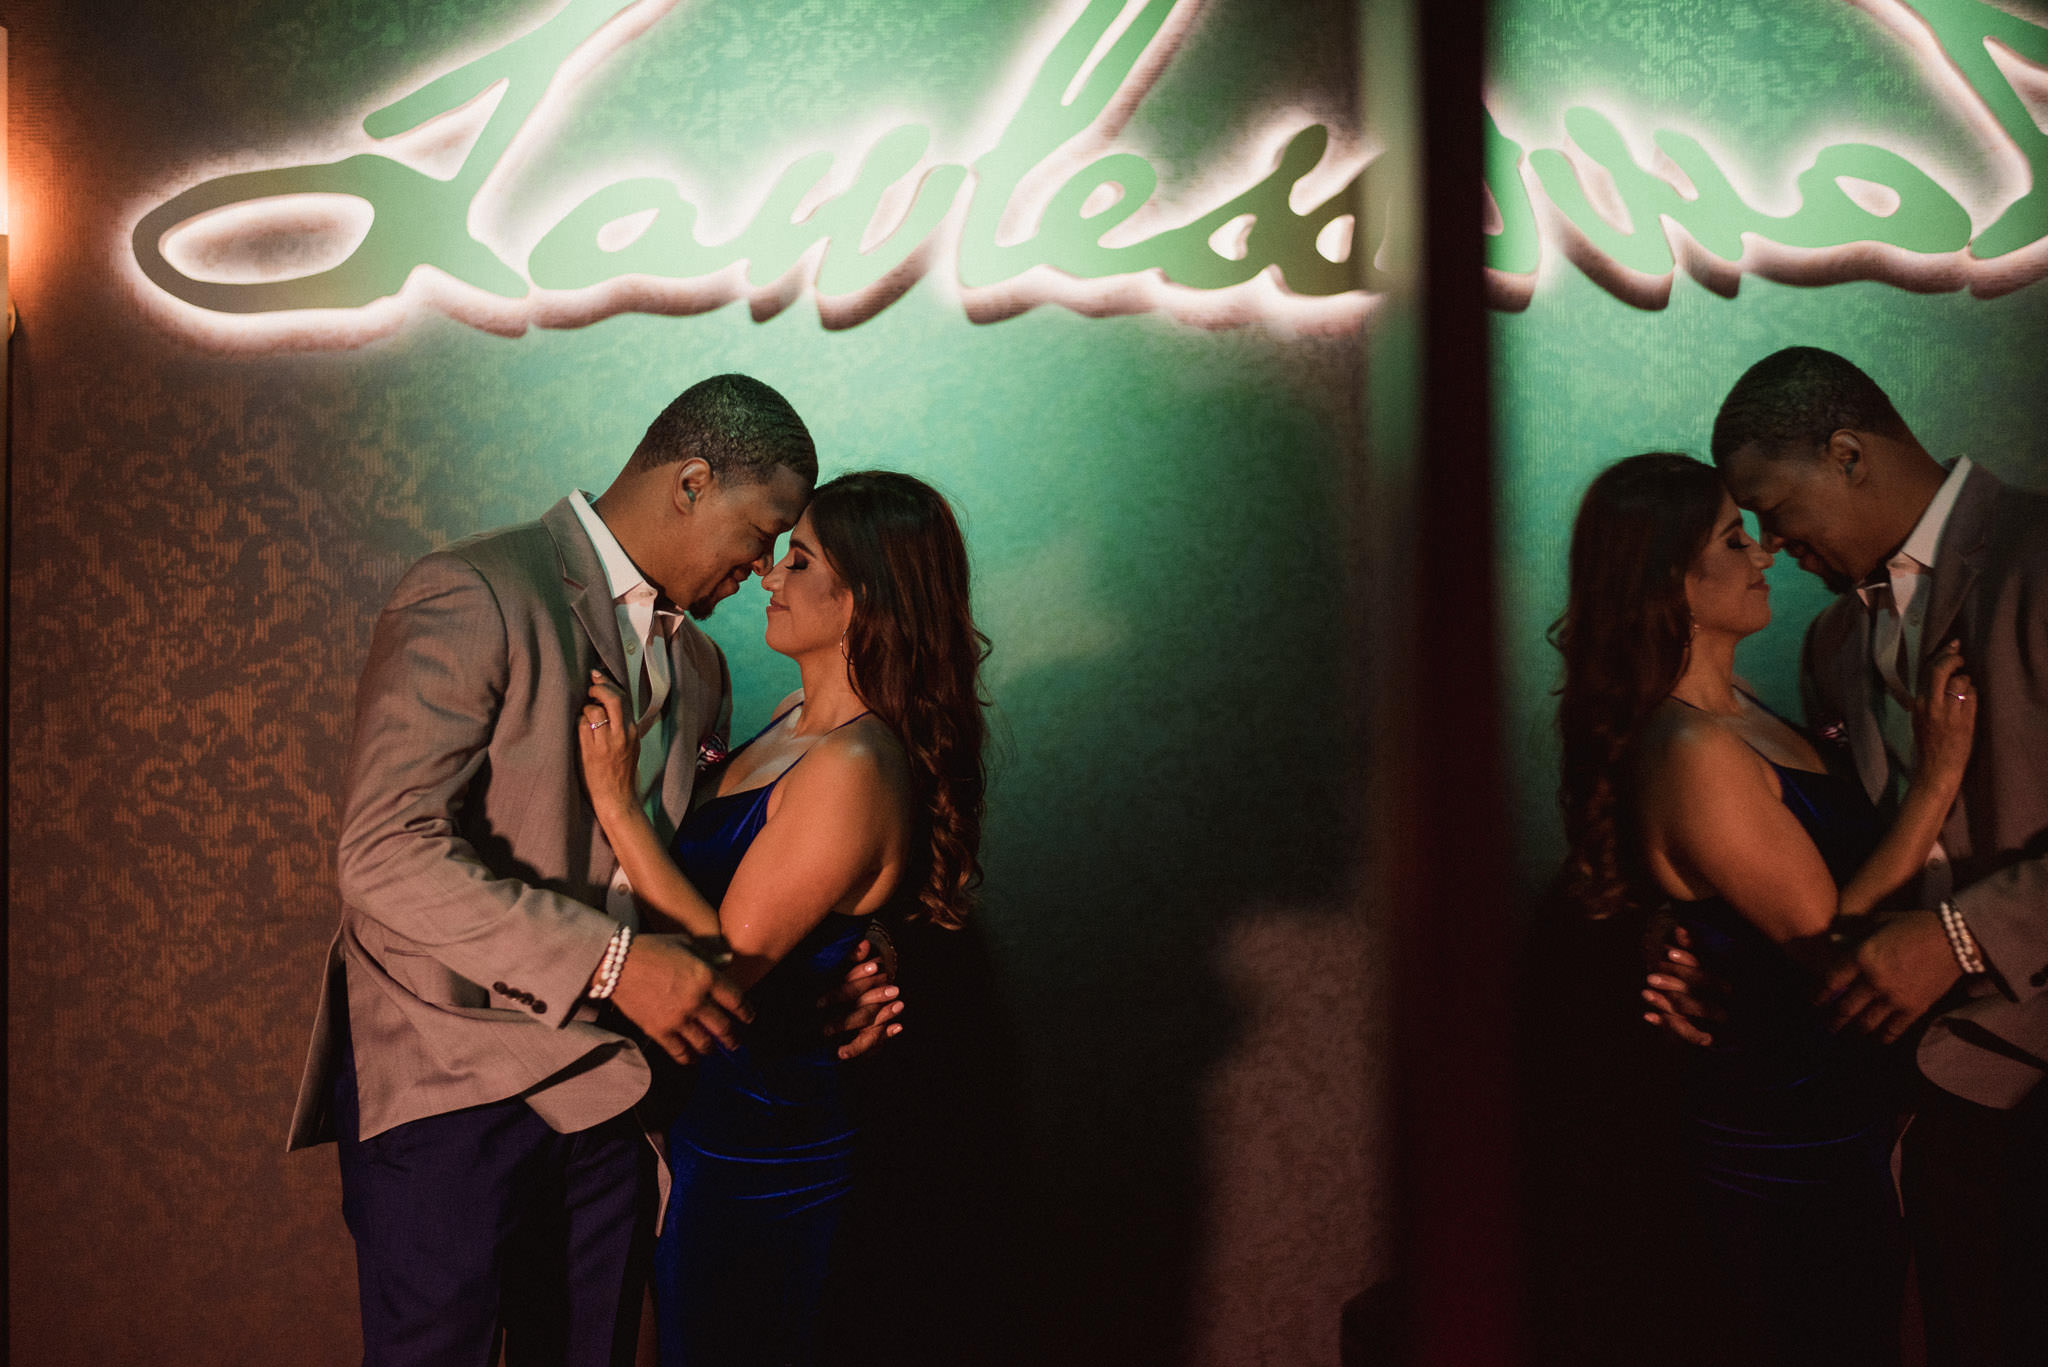 lawless-swanky-classy-iconic-bar-houston-black-tie-engagement-photographer-alcohol-cocktails-drinks-lifestyle